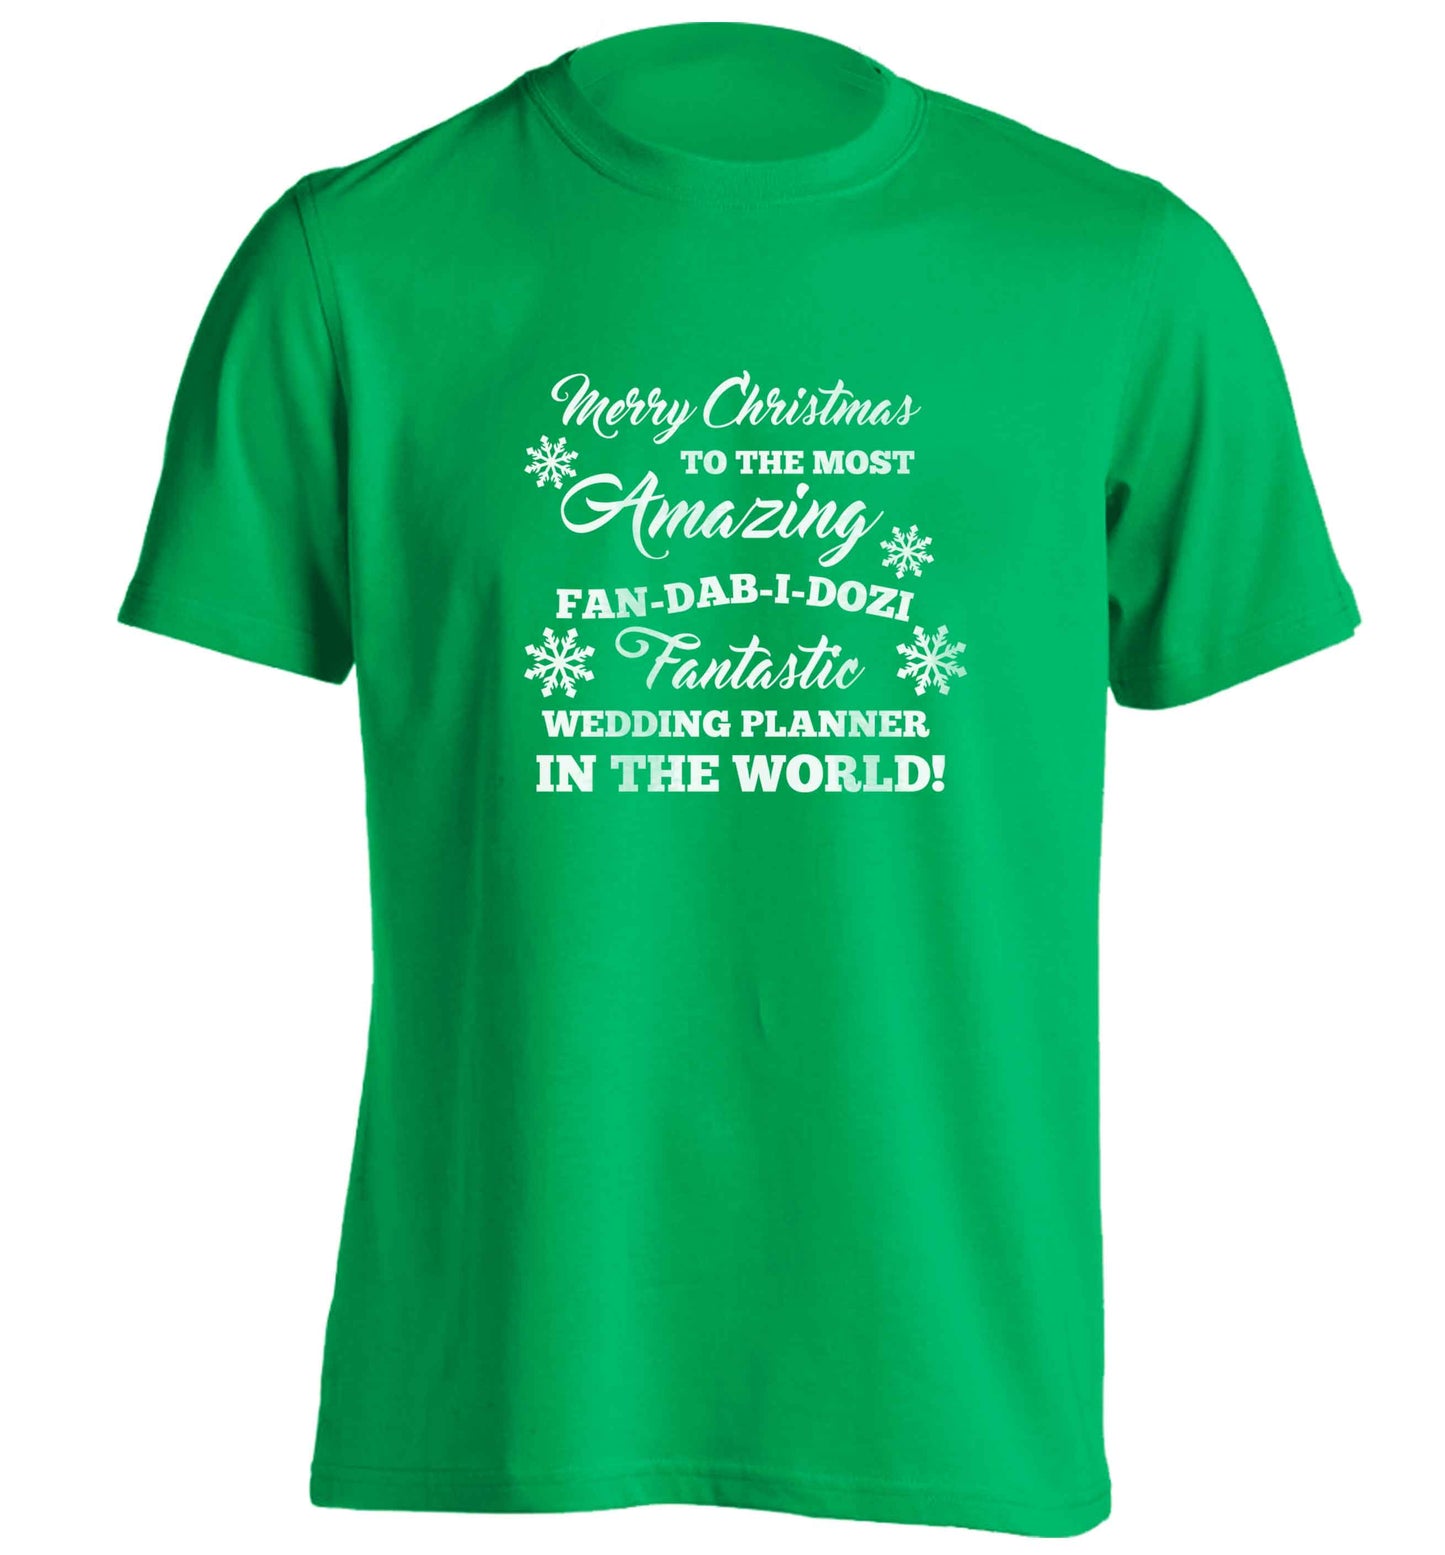 Merry Christmas to the most amazing fan-dab-i-dozi fantasic wedding planner in the world adults unisex green Tshirt 2XL